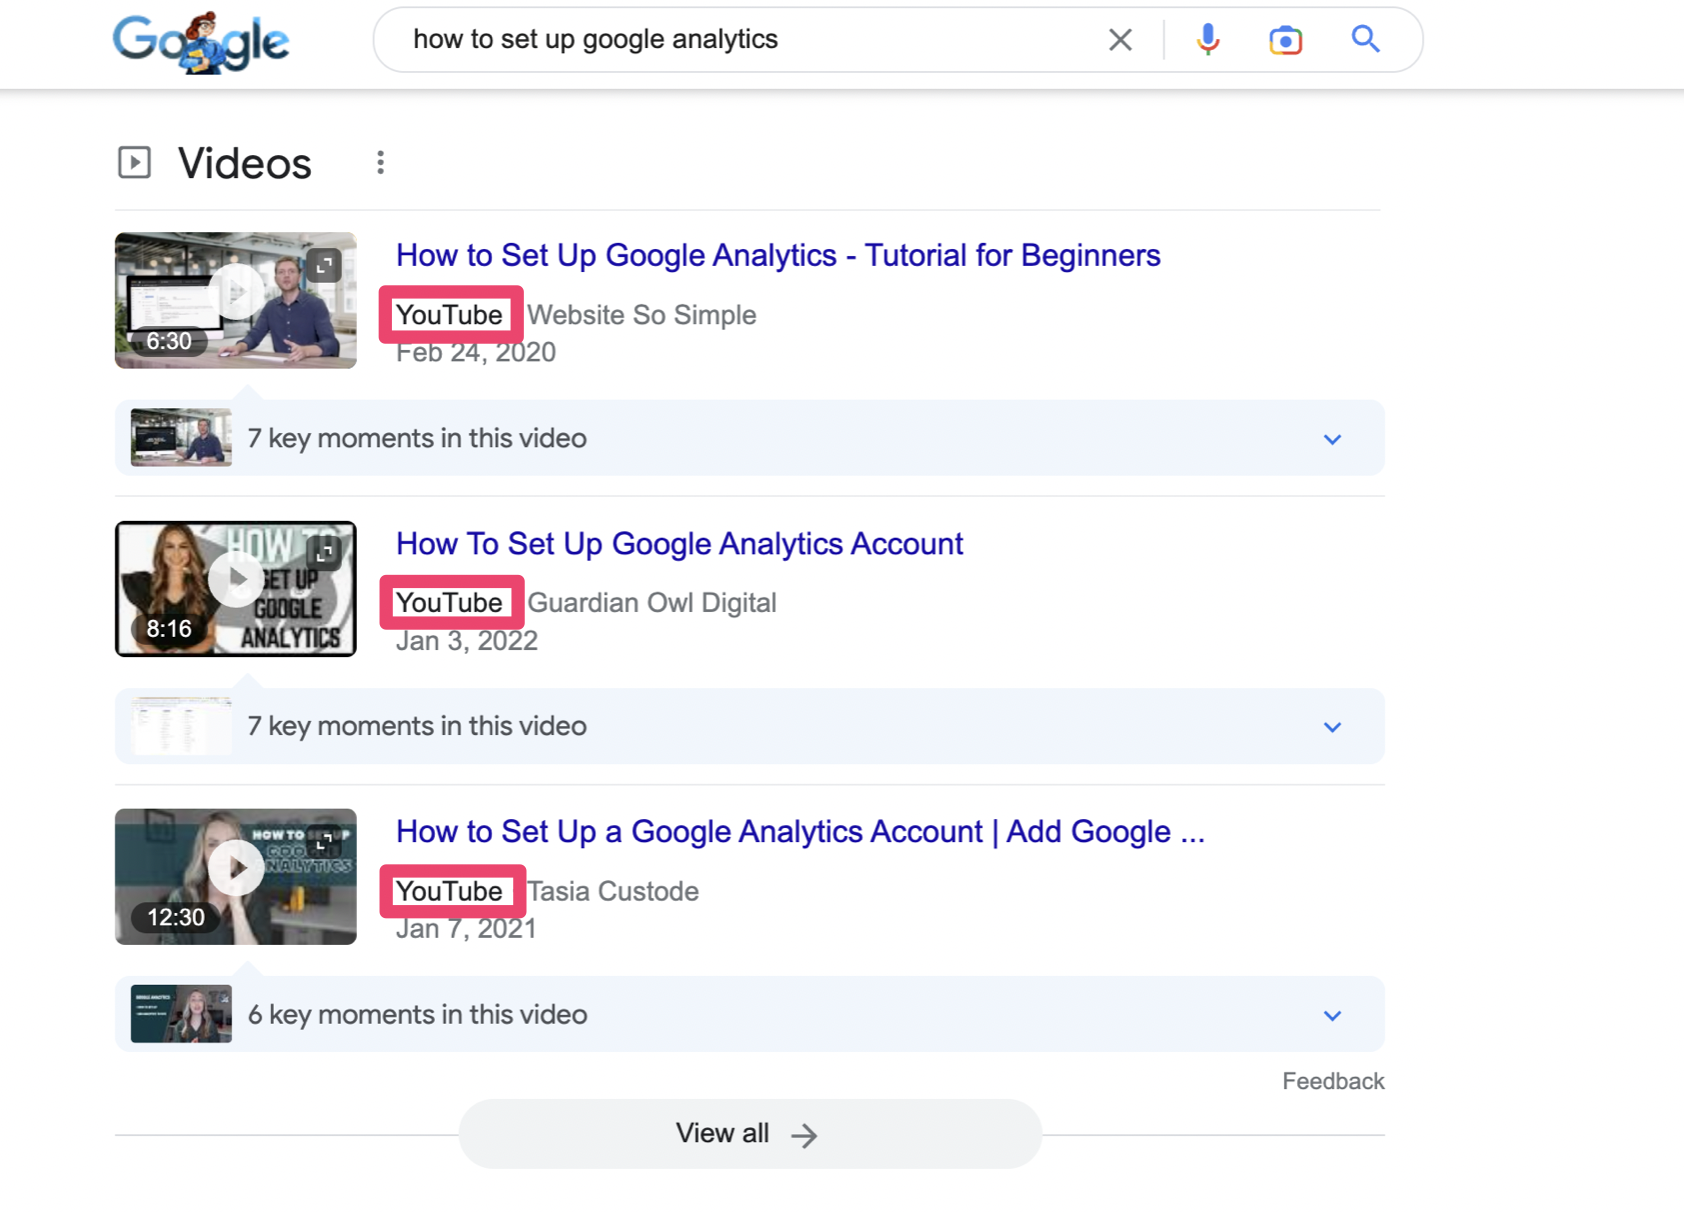 Video results in an organic Google search